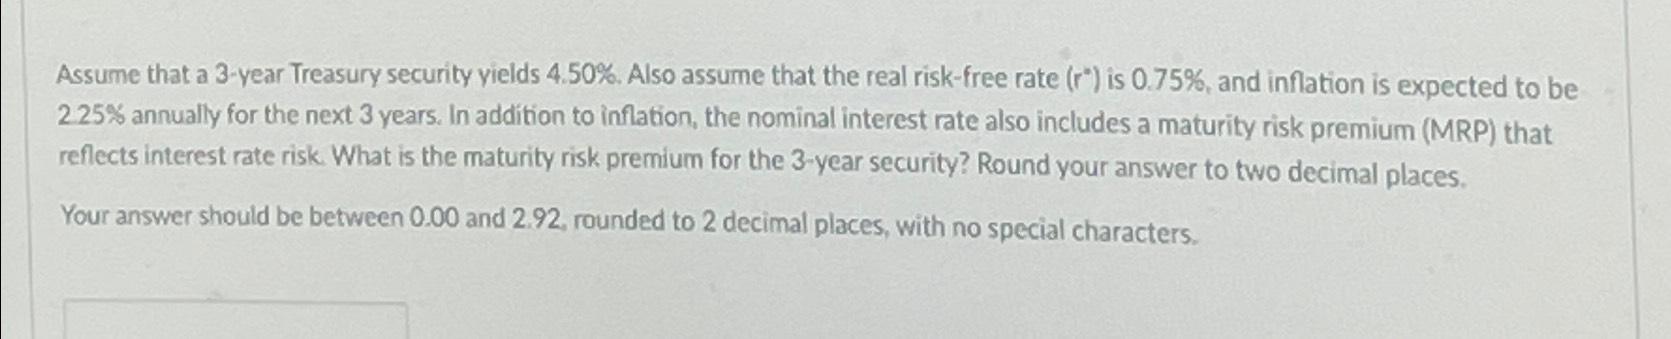 Assume that a 3-year Treasury security yields 4.50%. Also assume that the real risk-free rate (r") is 0.75%,